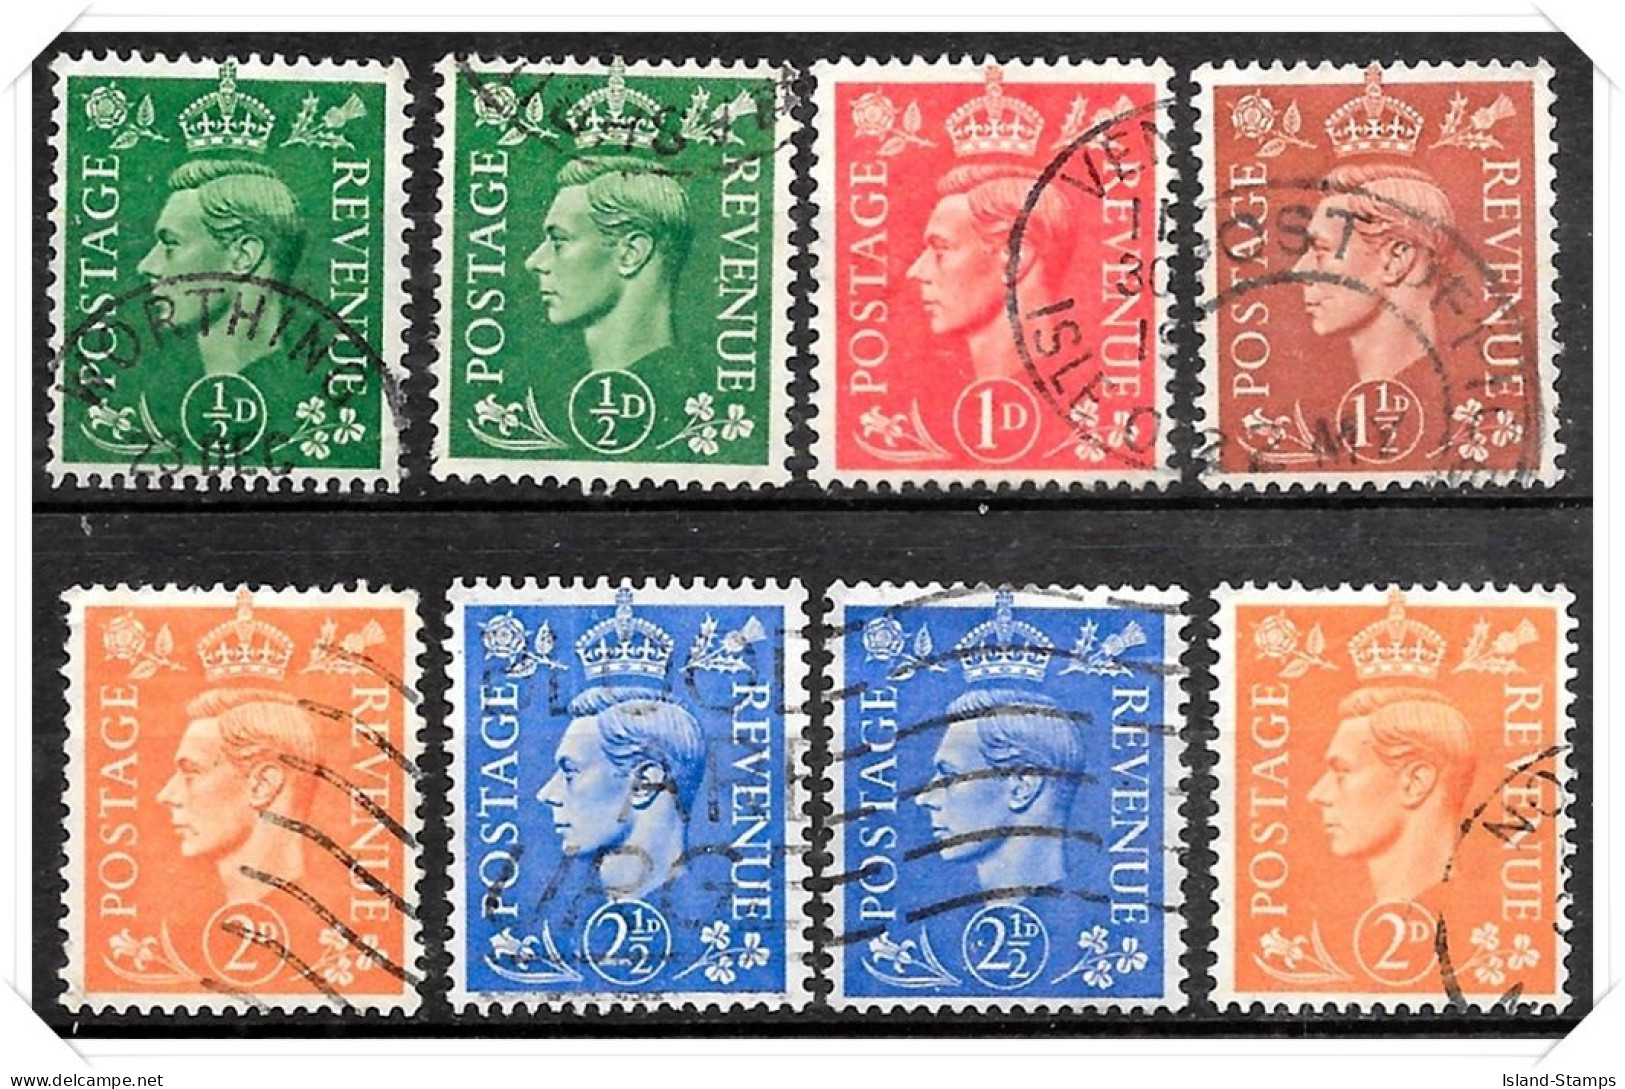 KGVI 1941 Definitives Colour Change SG485 - SG490 Used & Mounted Mint Hrd2a - Neufs